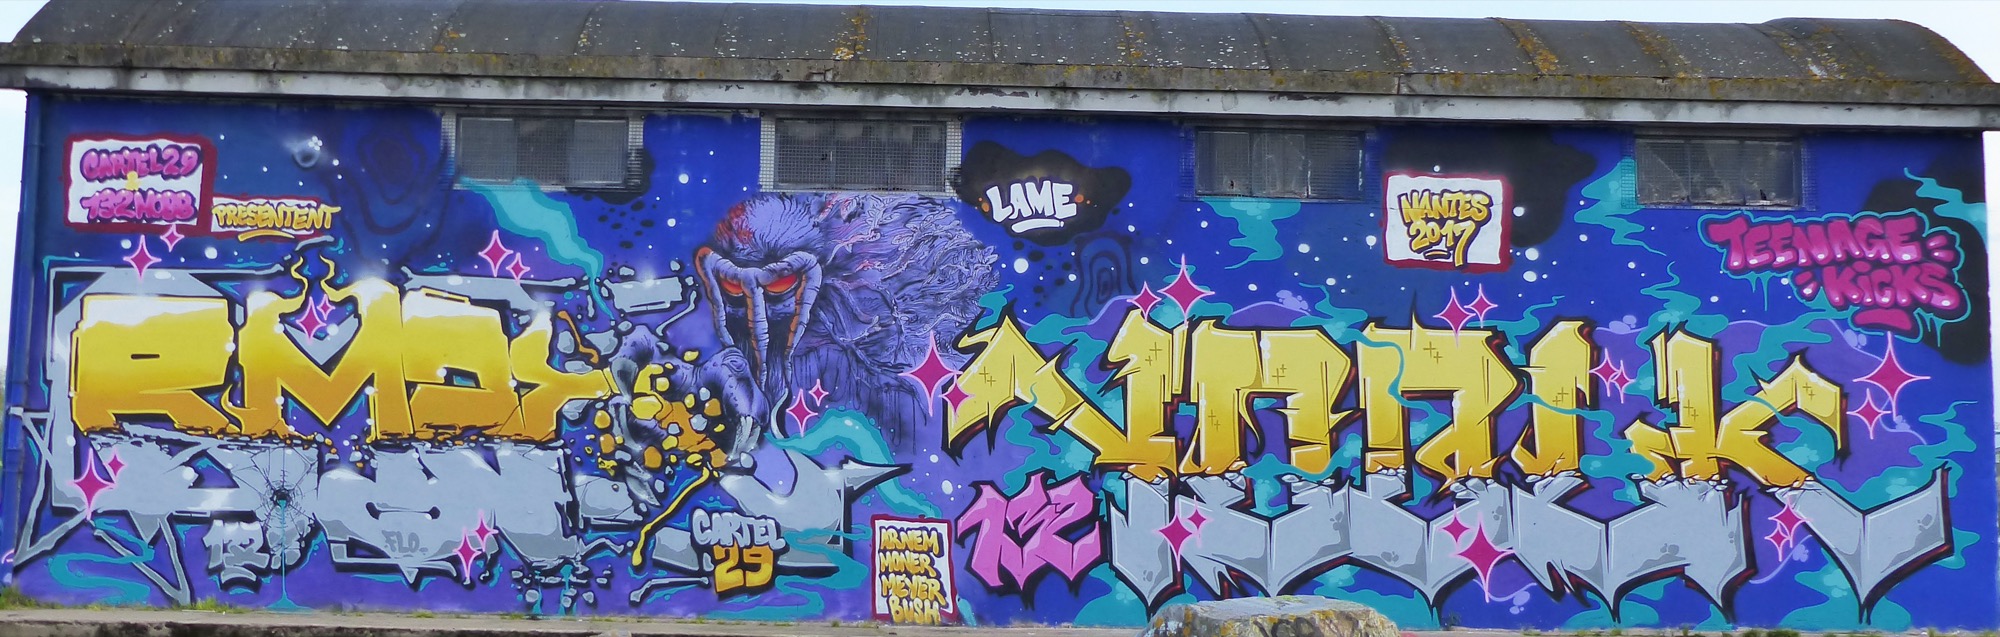 Graffiti 32  captured by Rabot in Nantes France